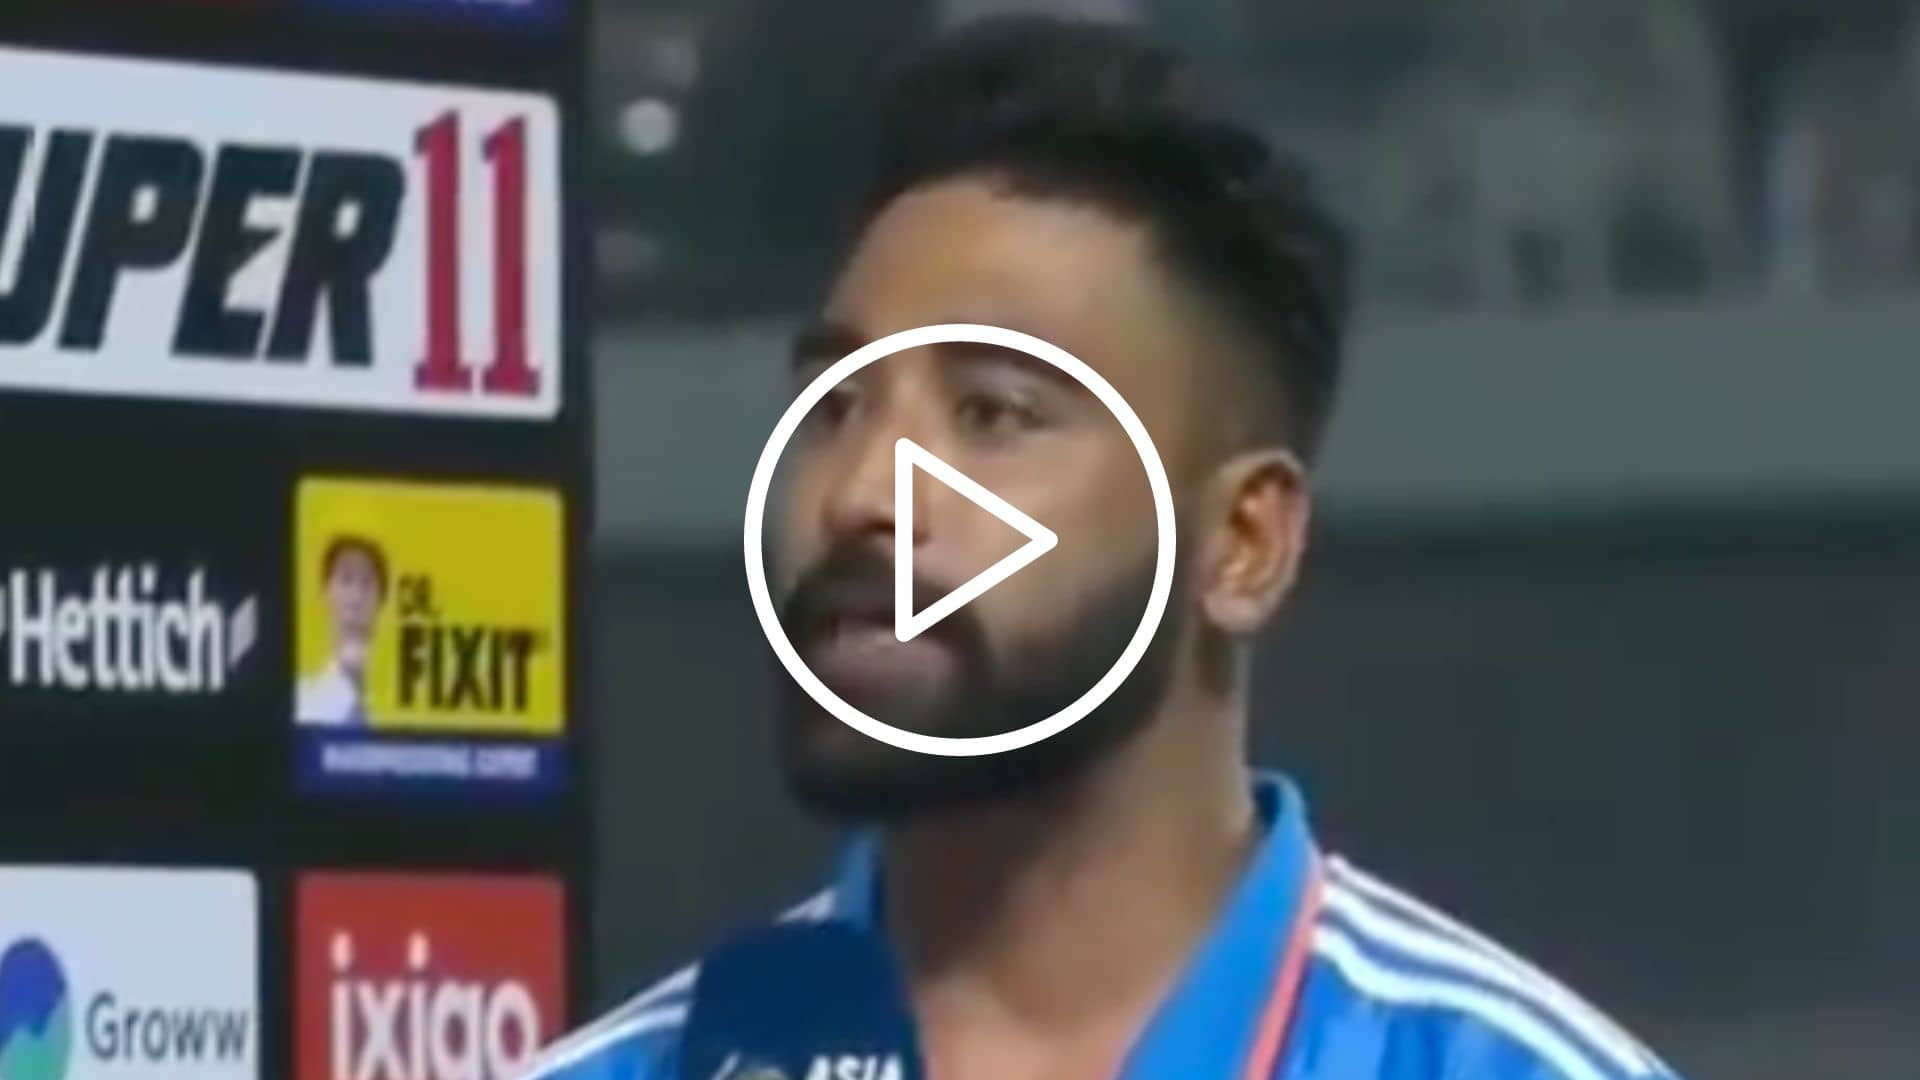 [Watch] Mohammed Siraj Wins Hearts With His Prize Money Gift To Groundsmen